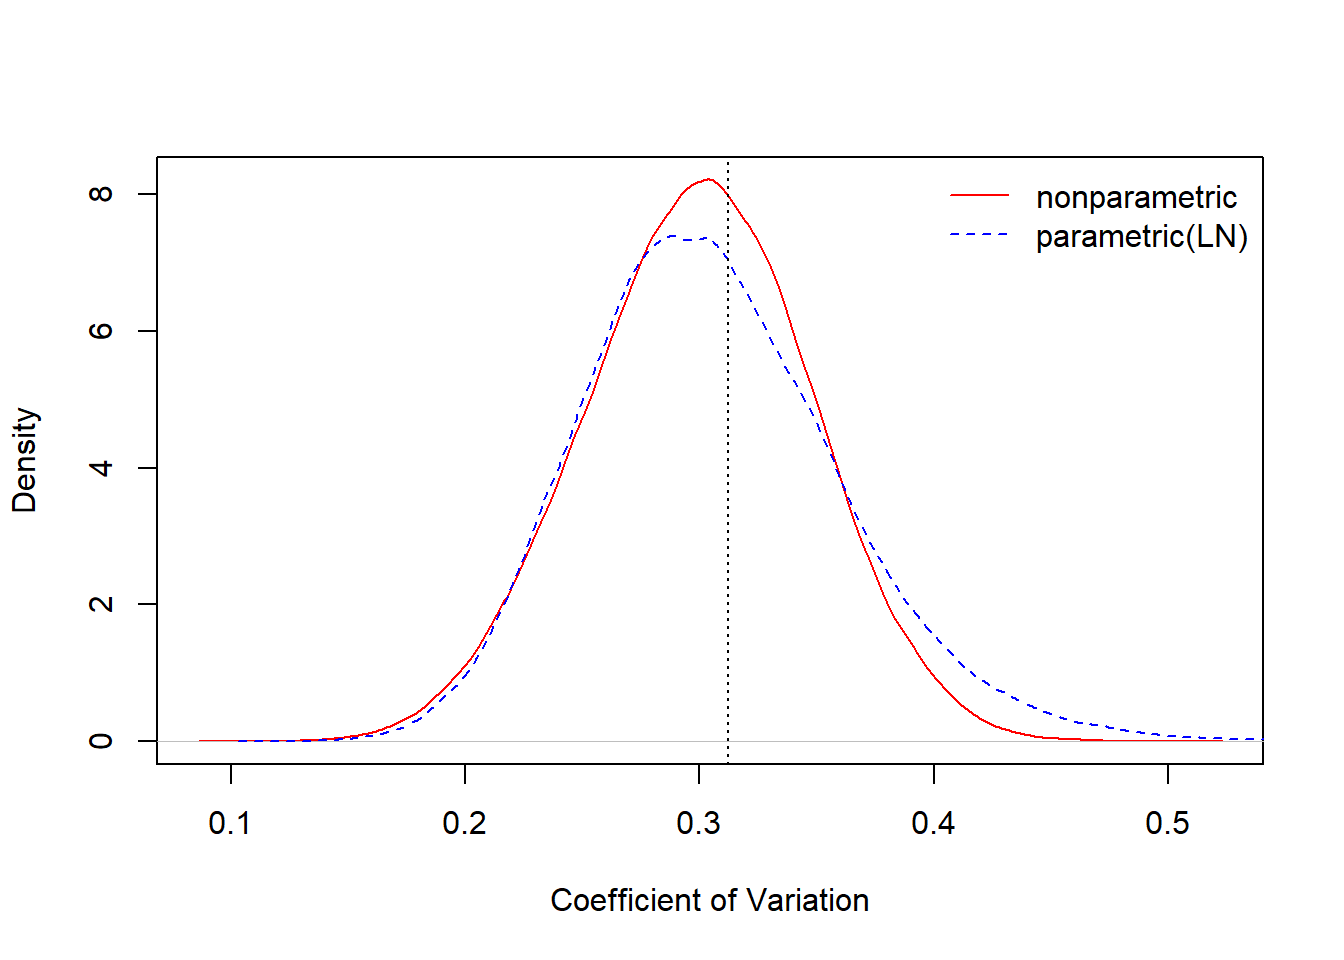 Comparison of Nonparametric and Parametric Bootstrap Distributions for the Coefficient of Variation